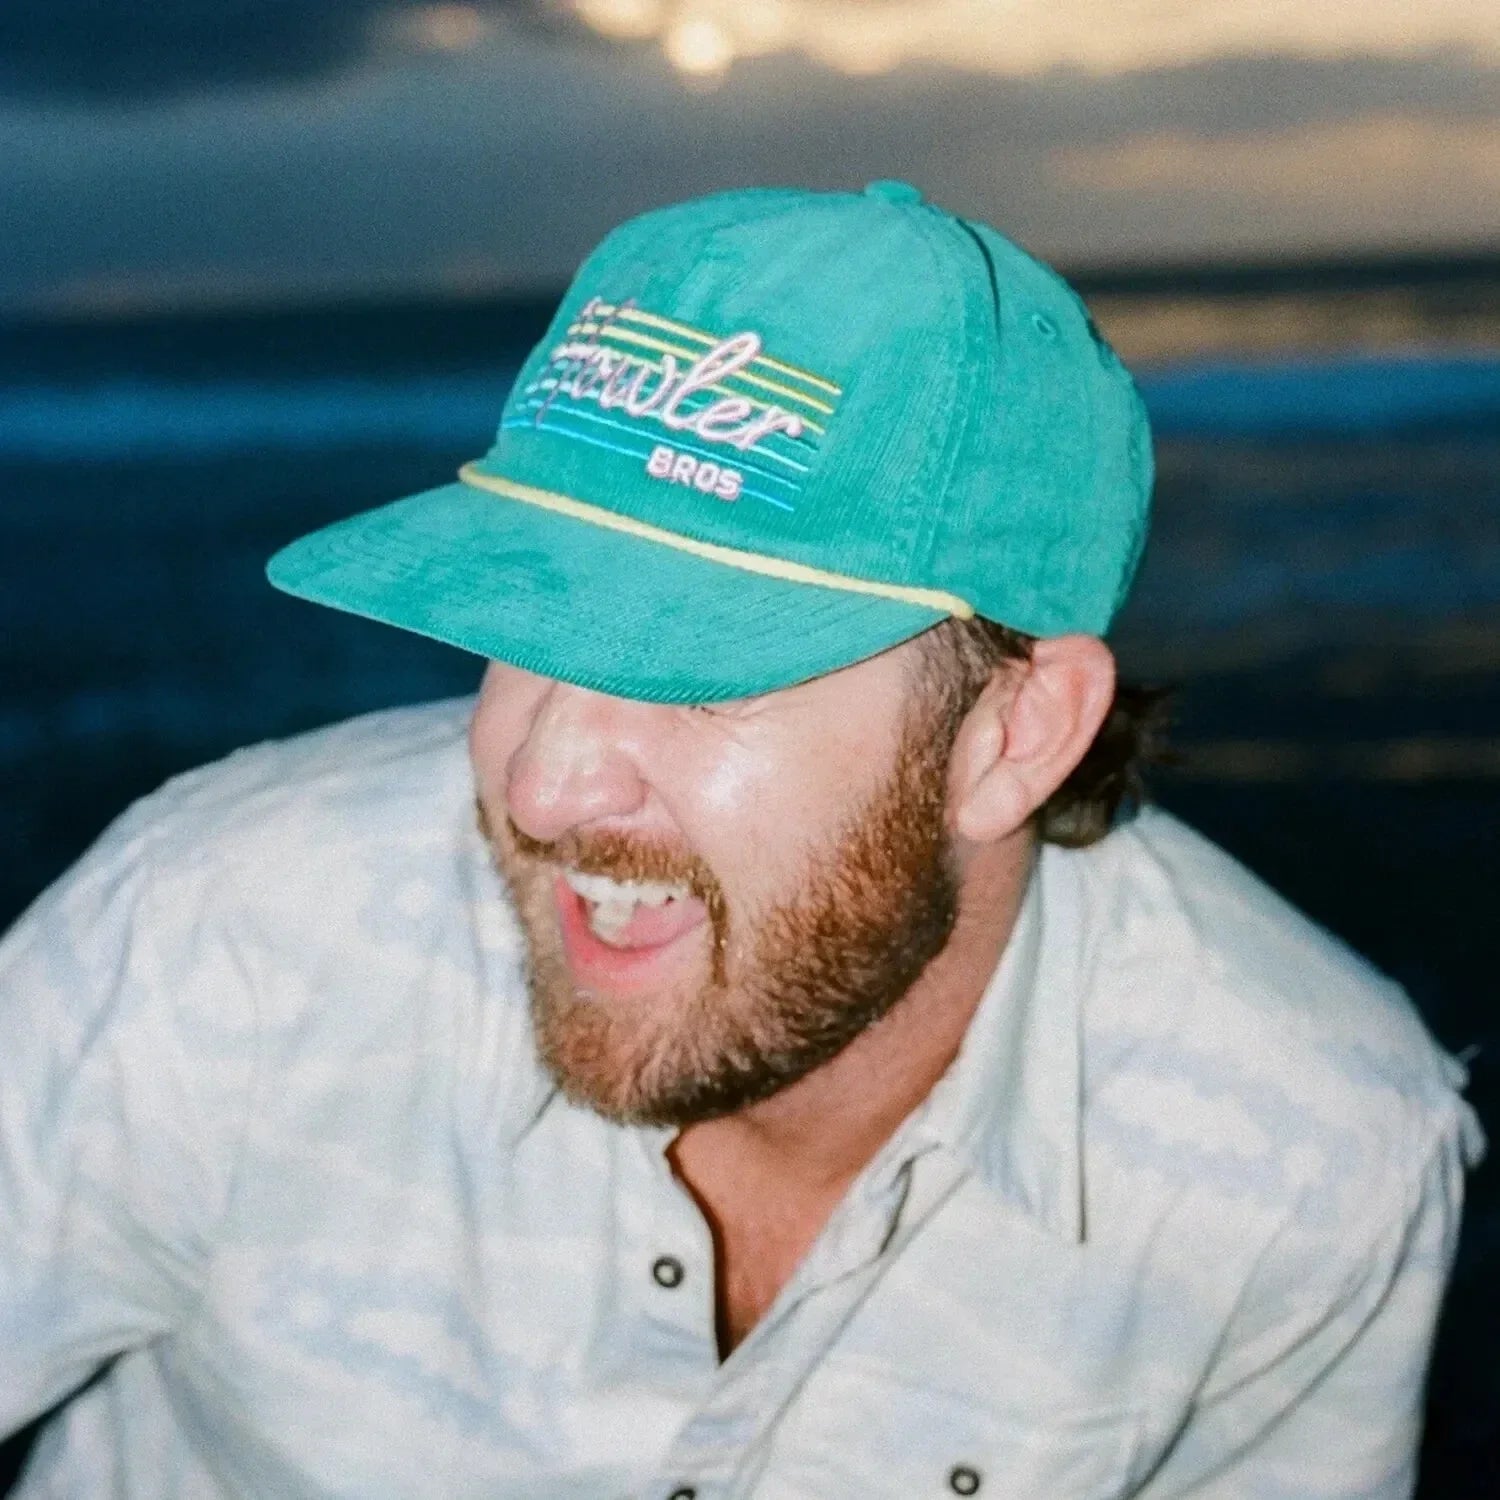 Howler Bros 20. HATS_GLOVES_SCARVES - HATS Unstructured Snapback Hats HOWLER BEACH CLUB | TEAL CORDUROY OS